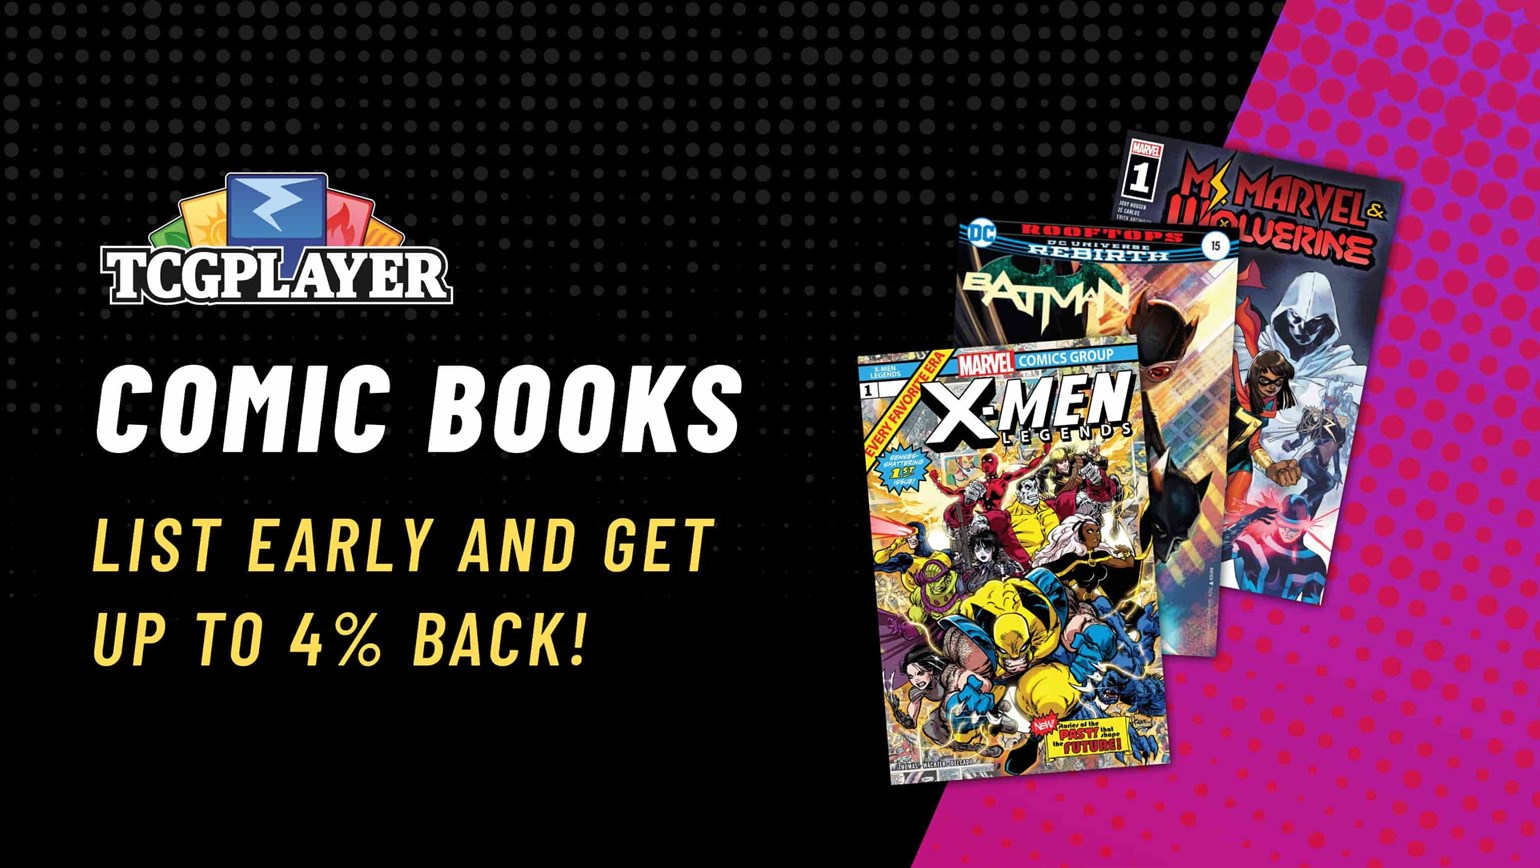 Early Bird Comic Book Sellers Get 4% Back on Sales!